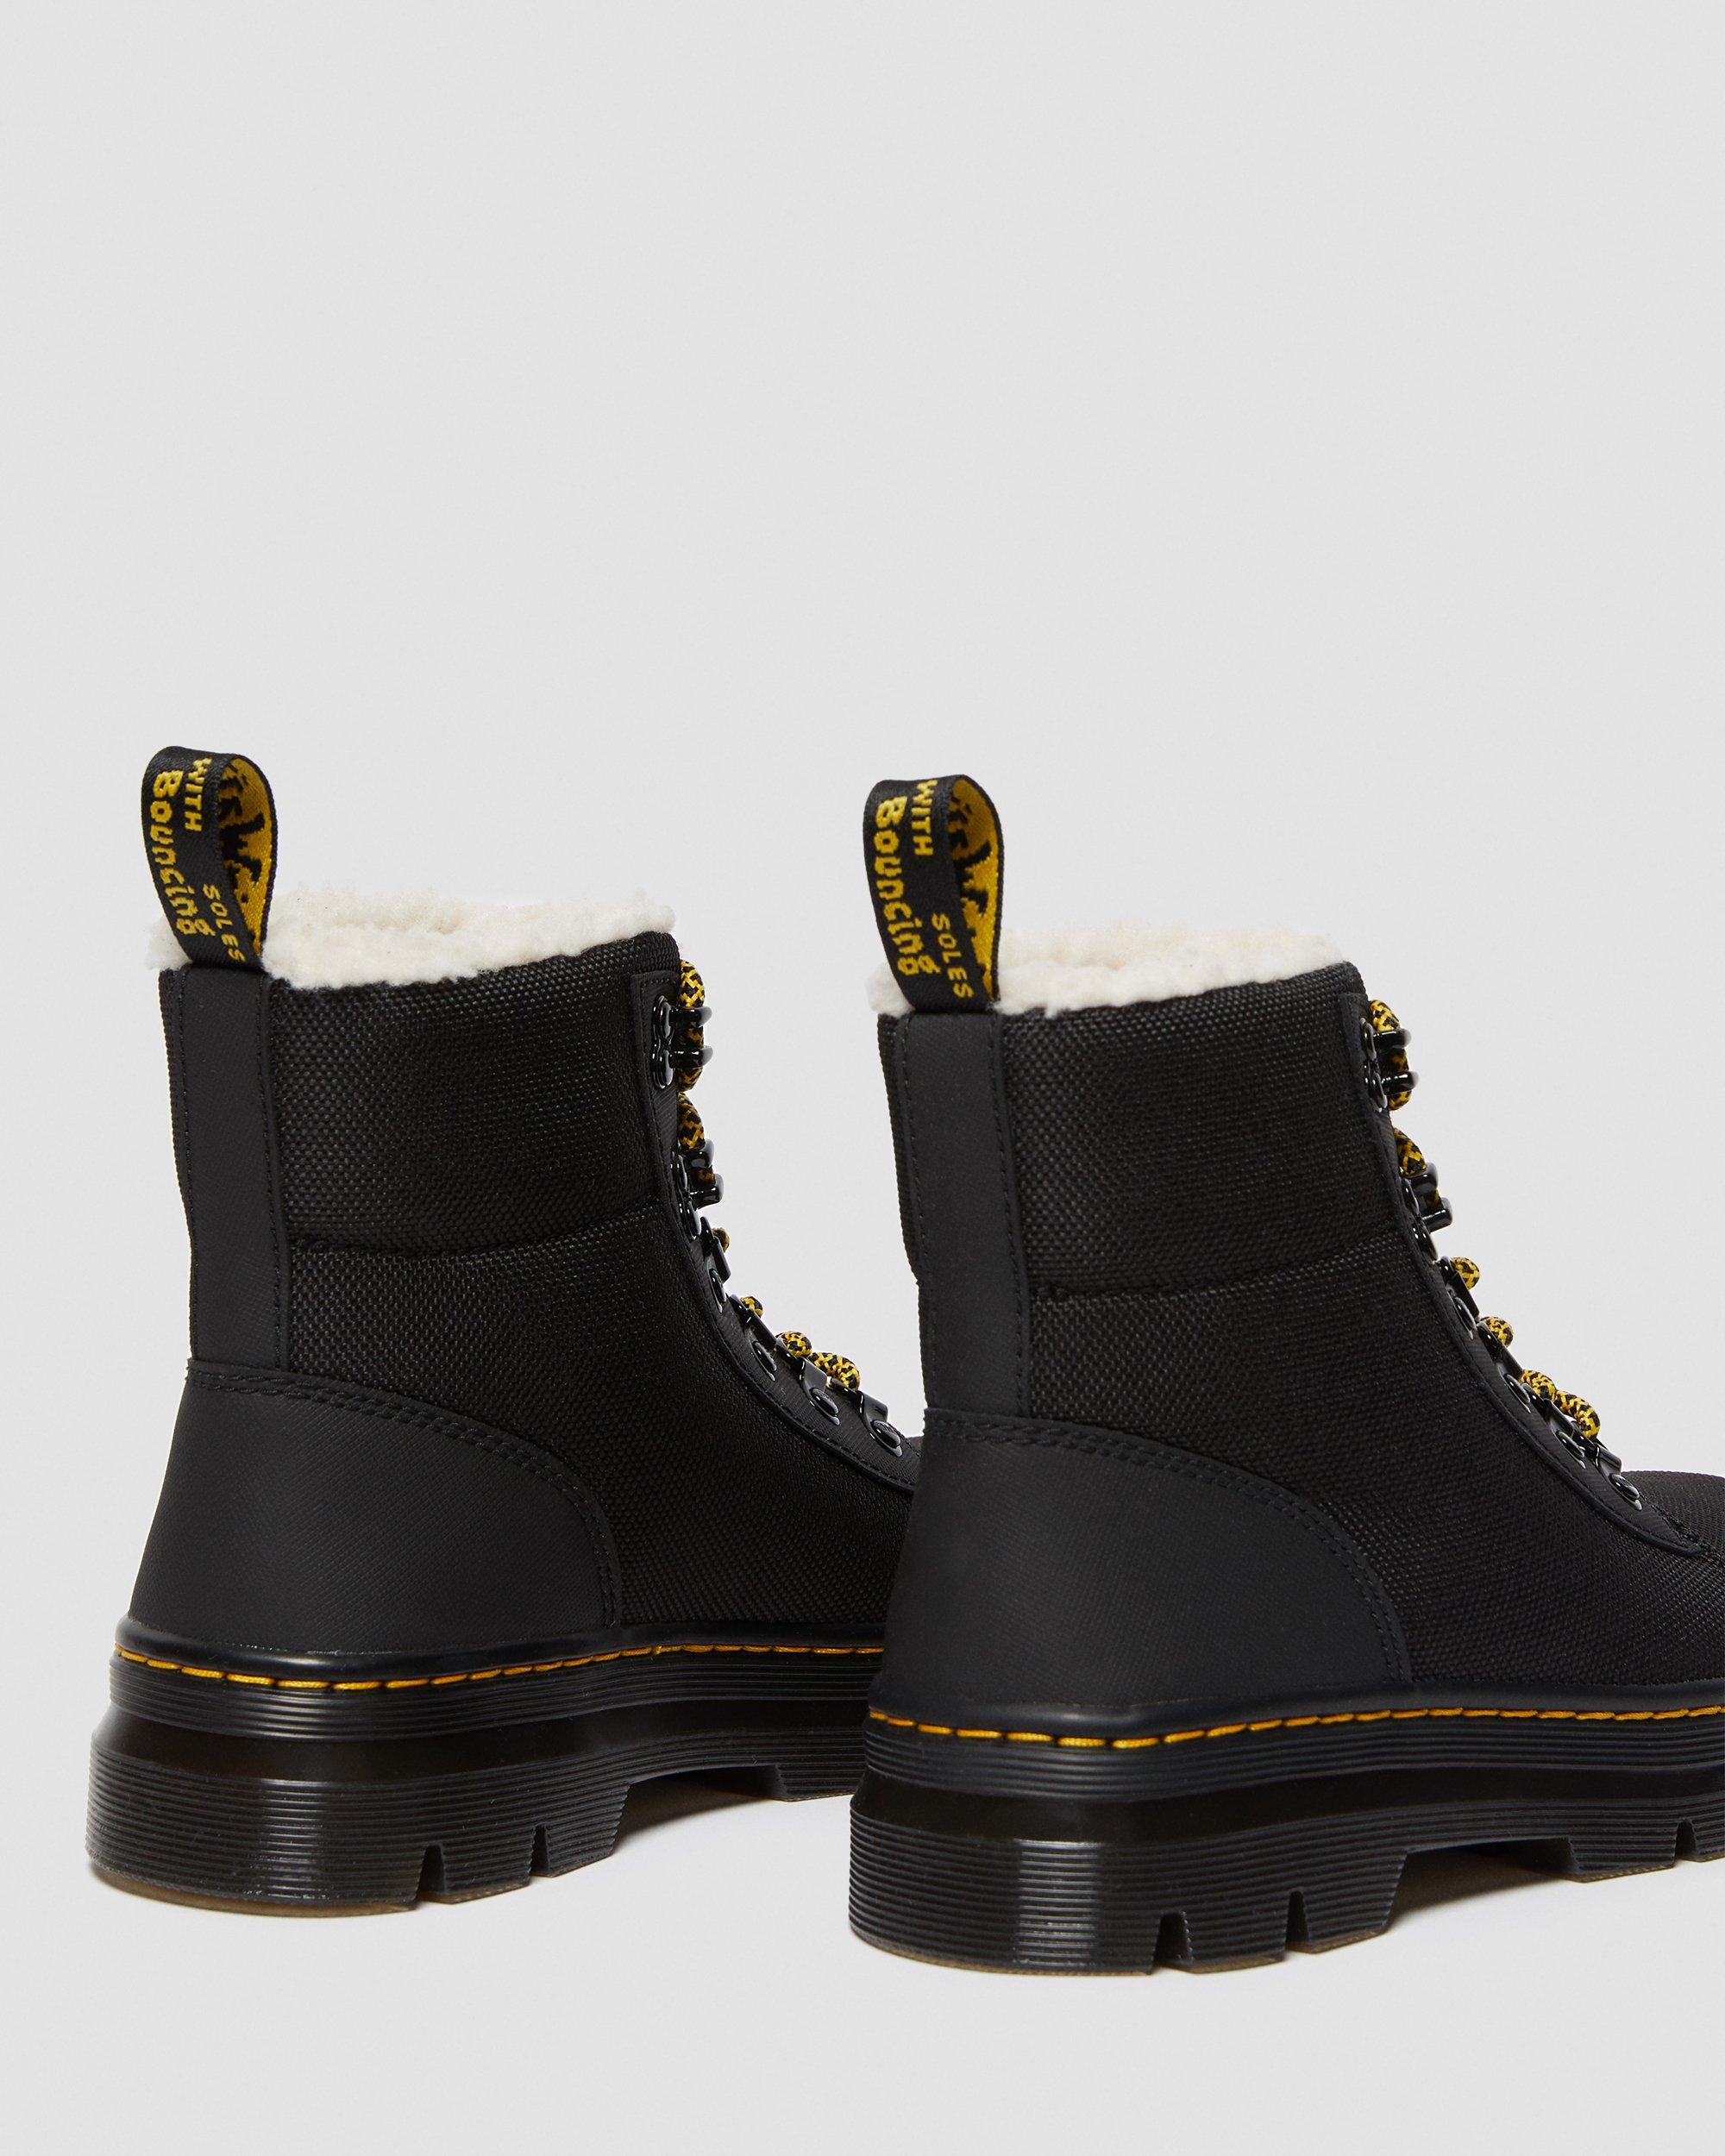 COMBS FUR LINED WARMWAIR BOOTS in Black